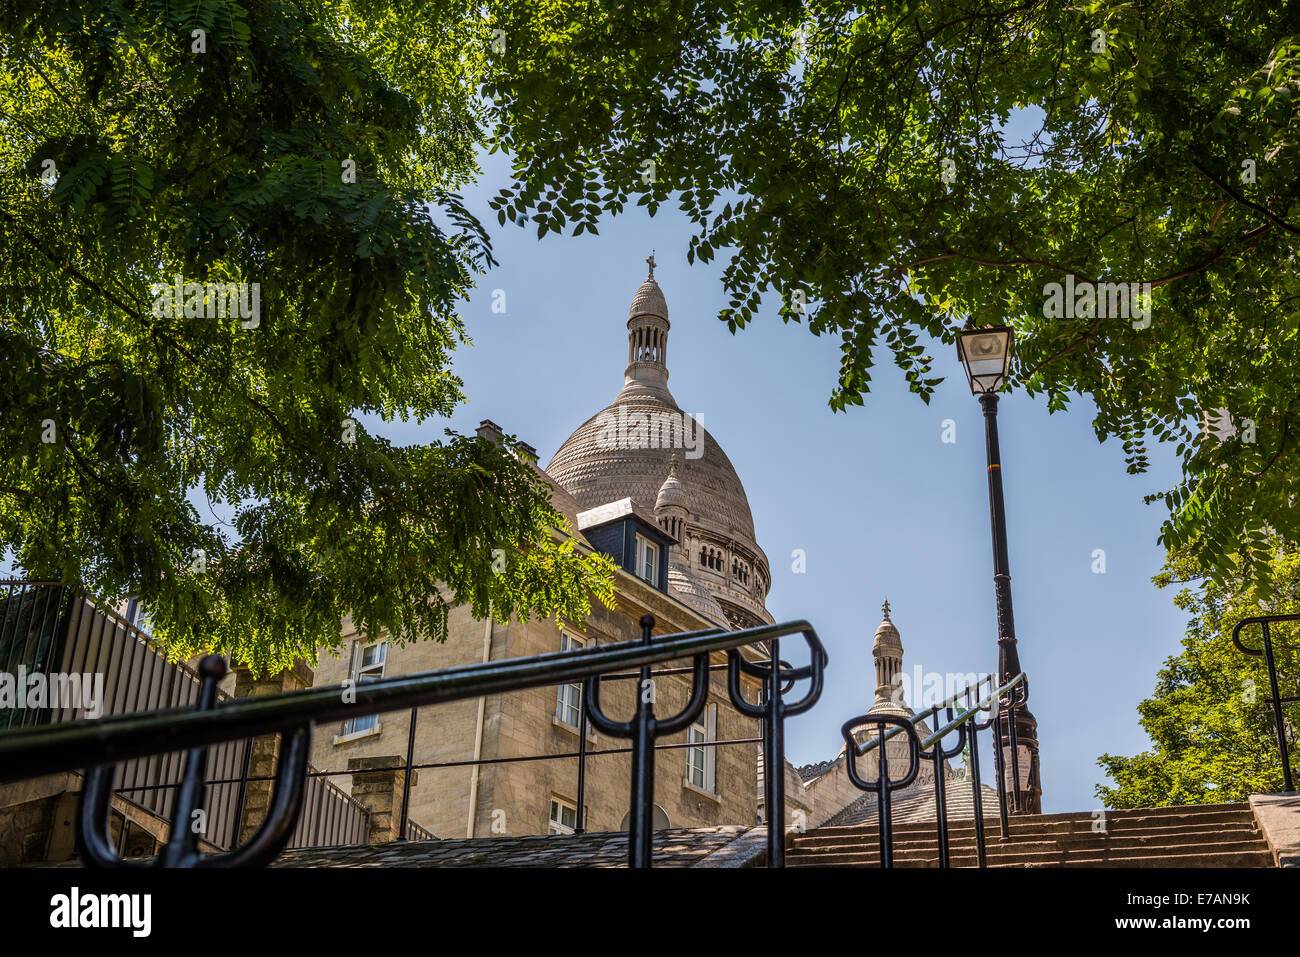 Looking up at the white dome of Sacre Coeur Montmatre Paris France. Stock Photo